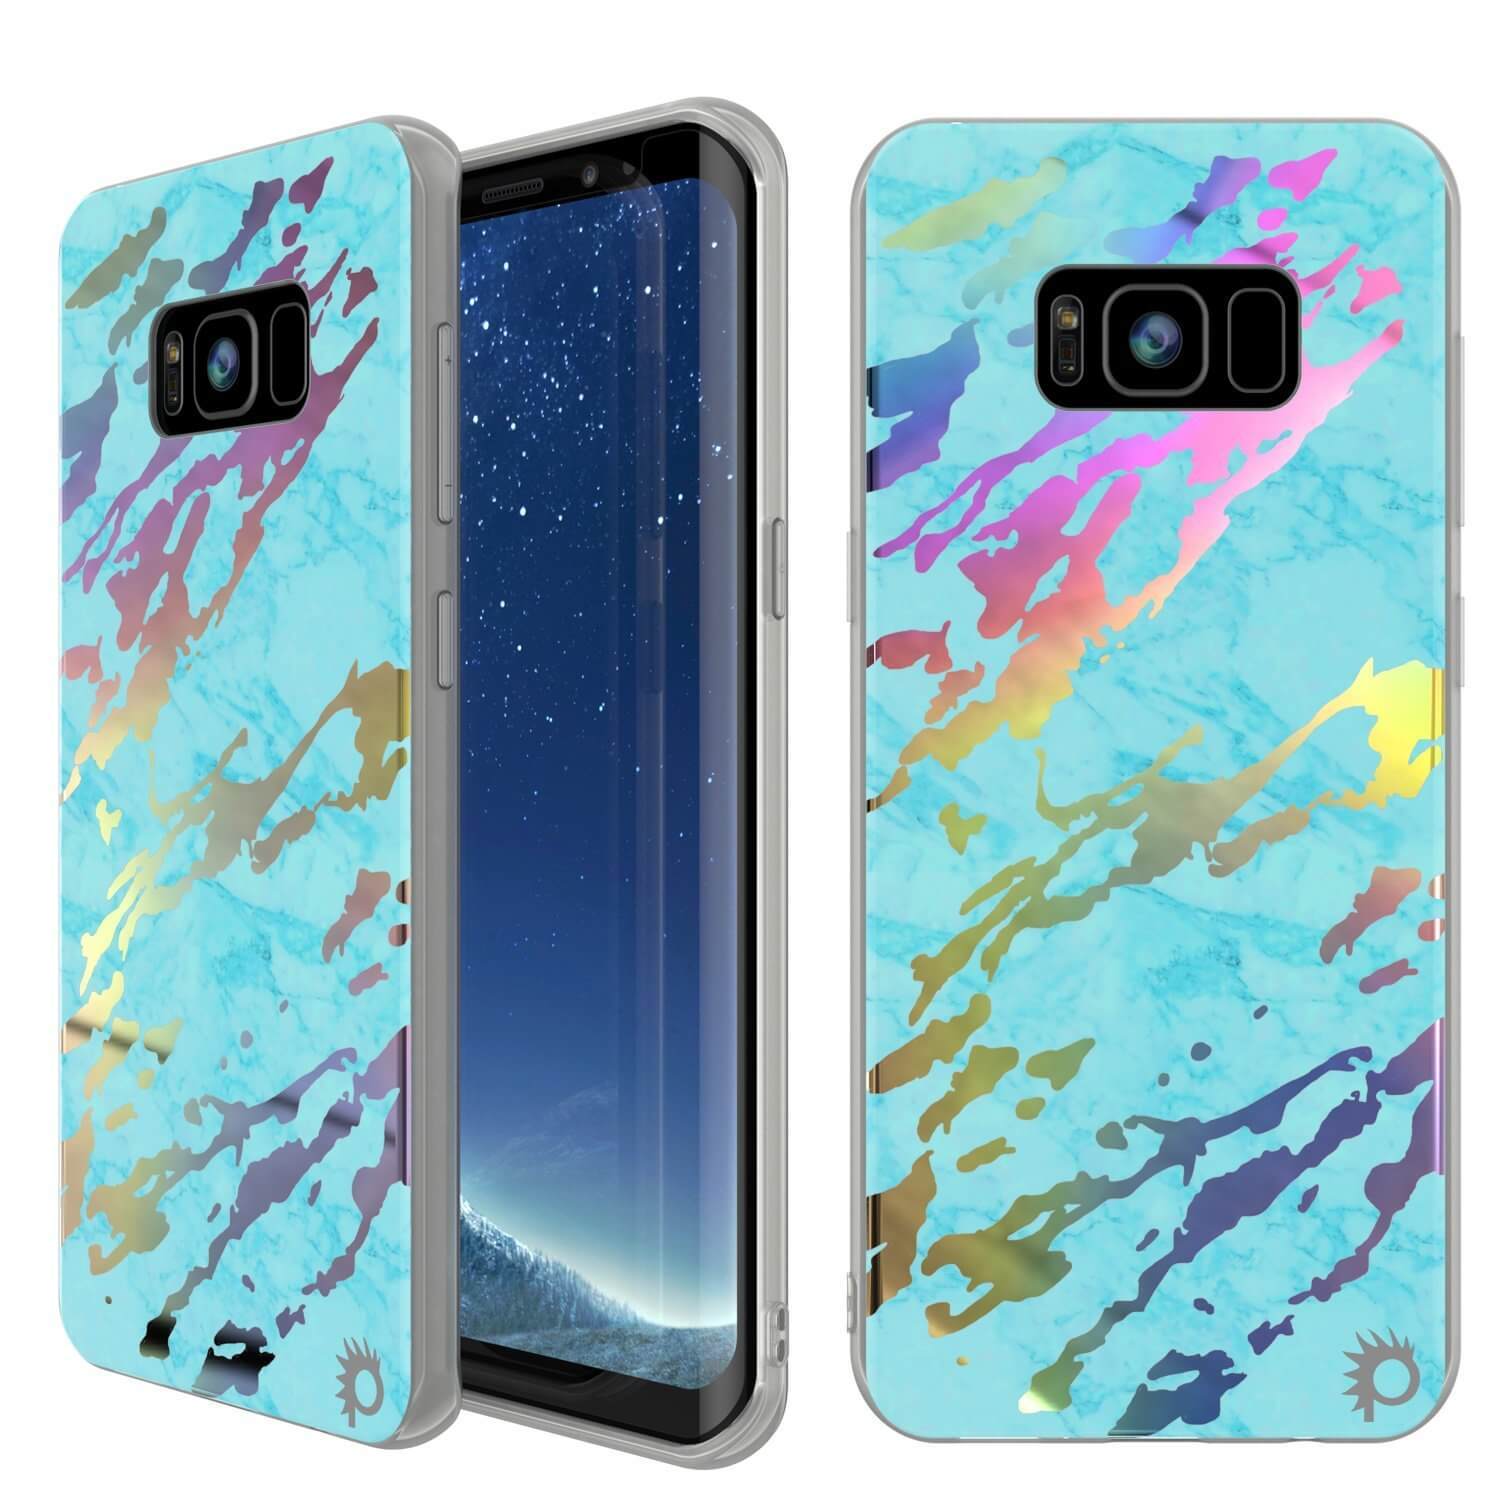 Punkcase Galaxy S8 Marble Case, Protective Full Body Cover W/PunkShield Screen Protector (Teal Onyx) (Color in image: Teal Onyx)